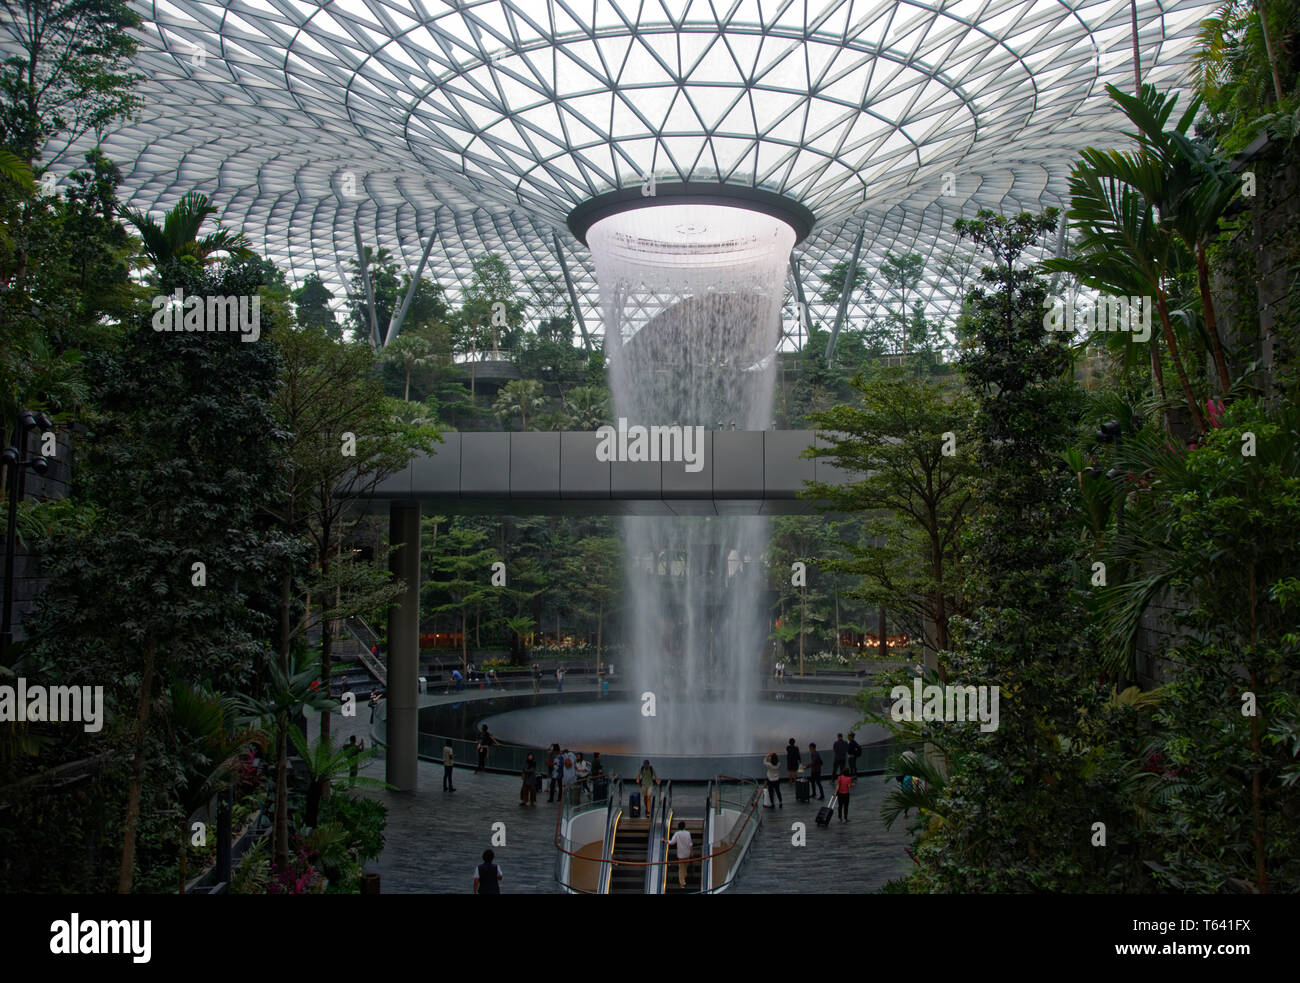 The world's biggest artificial indoor waterfall at the Jewel, Changi airport, Singapore, Asia Stock Photo